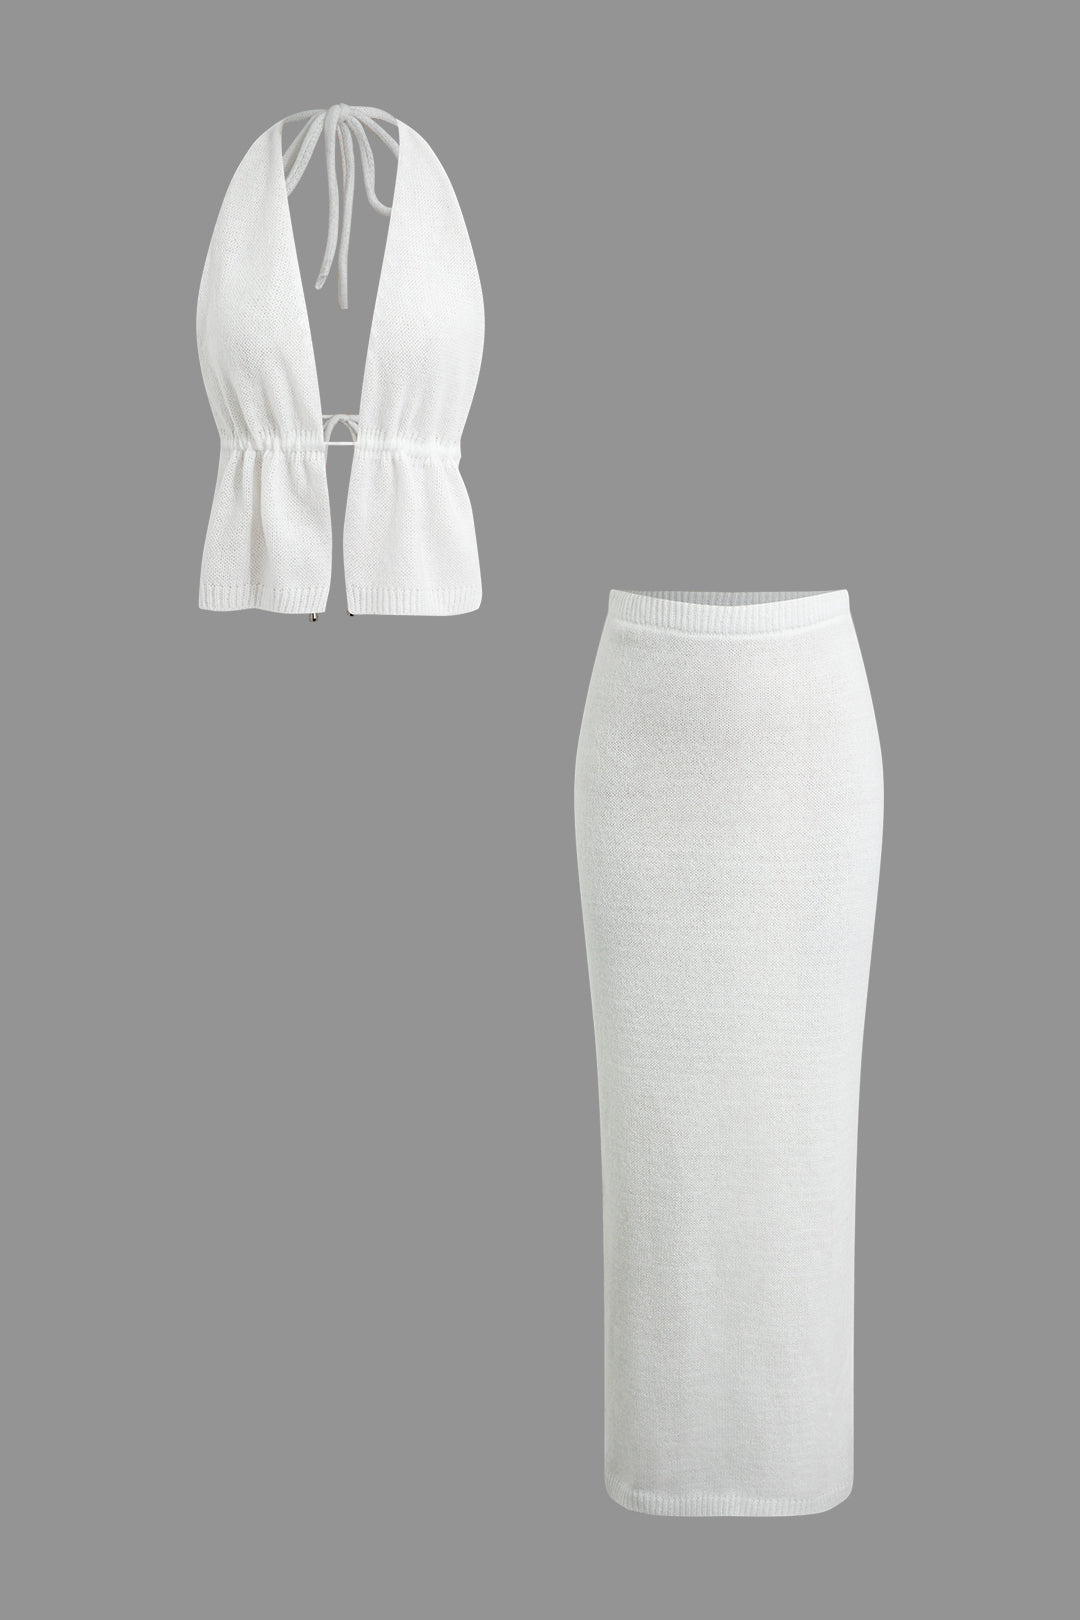 Backless Sleeveless Top and Fitted Knit Skirt Set